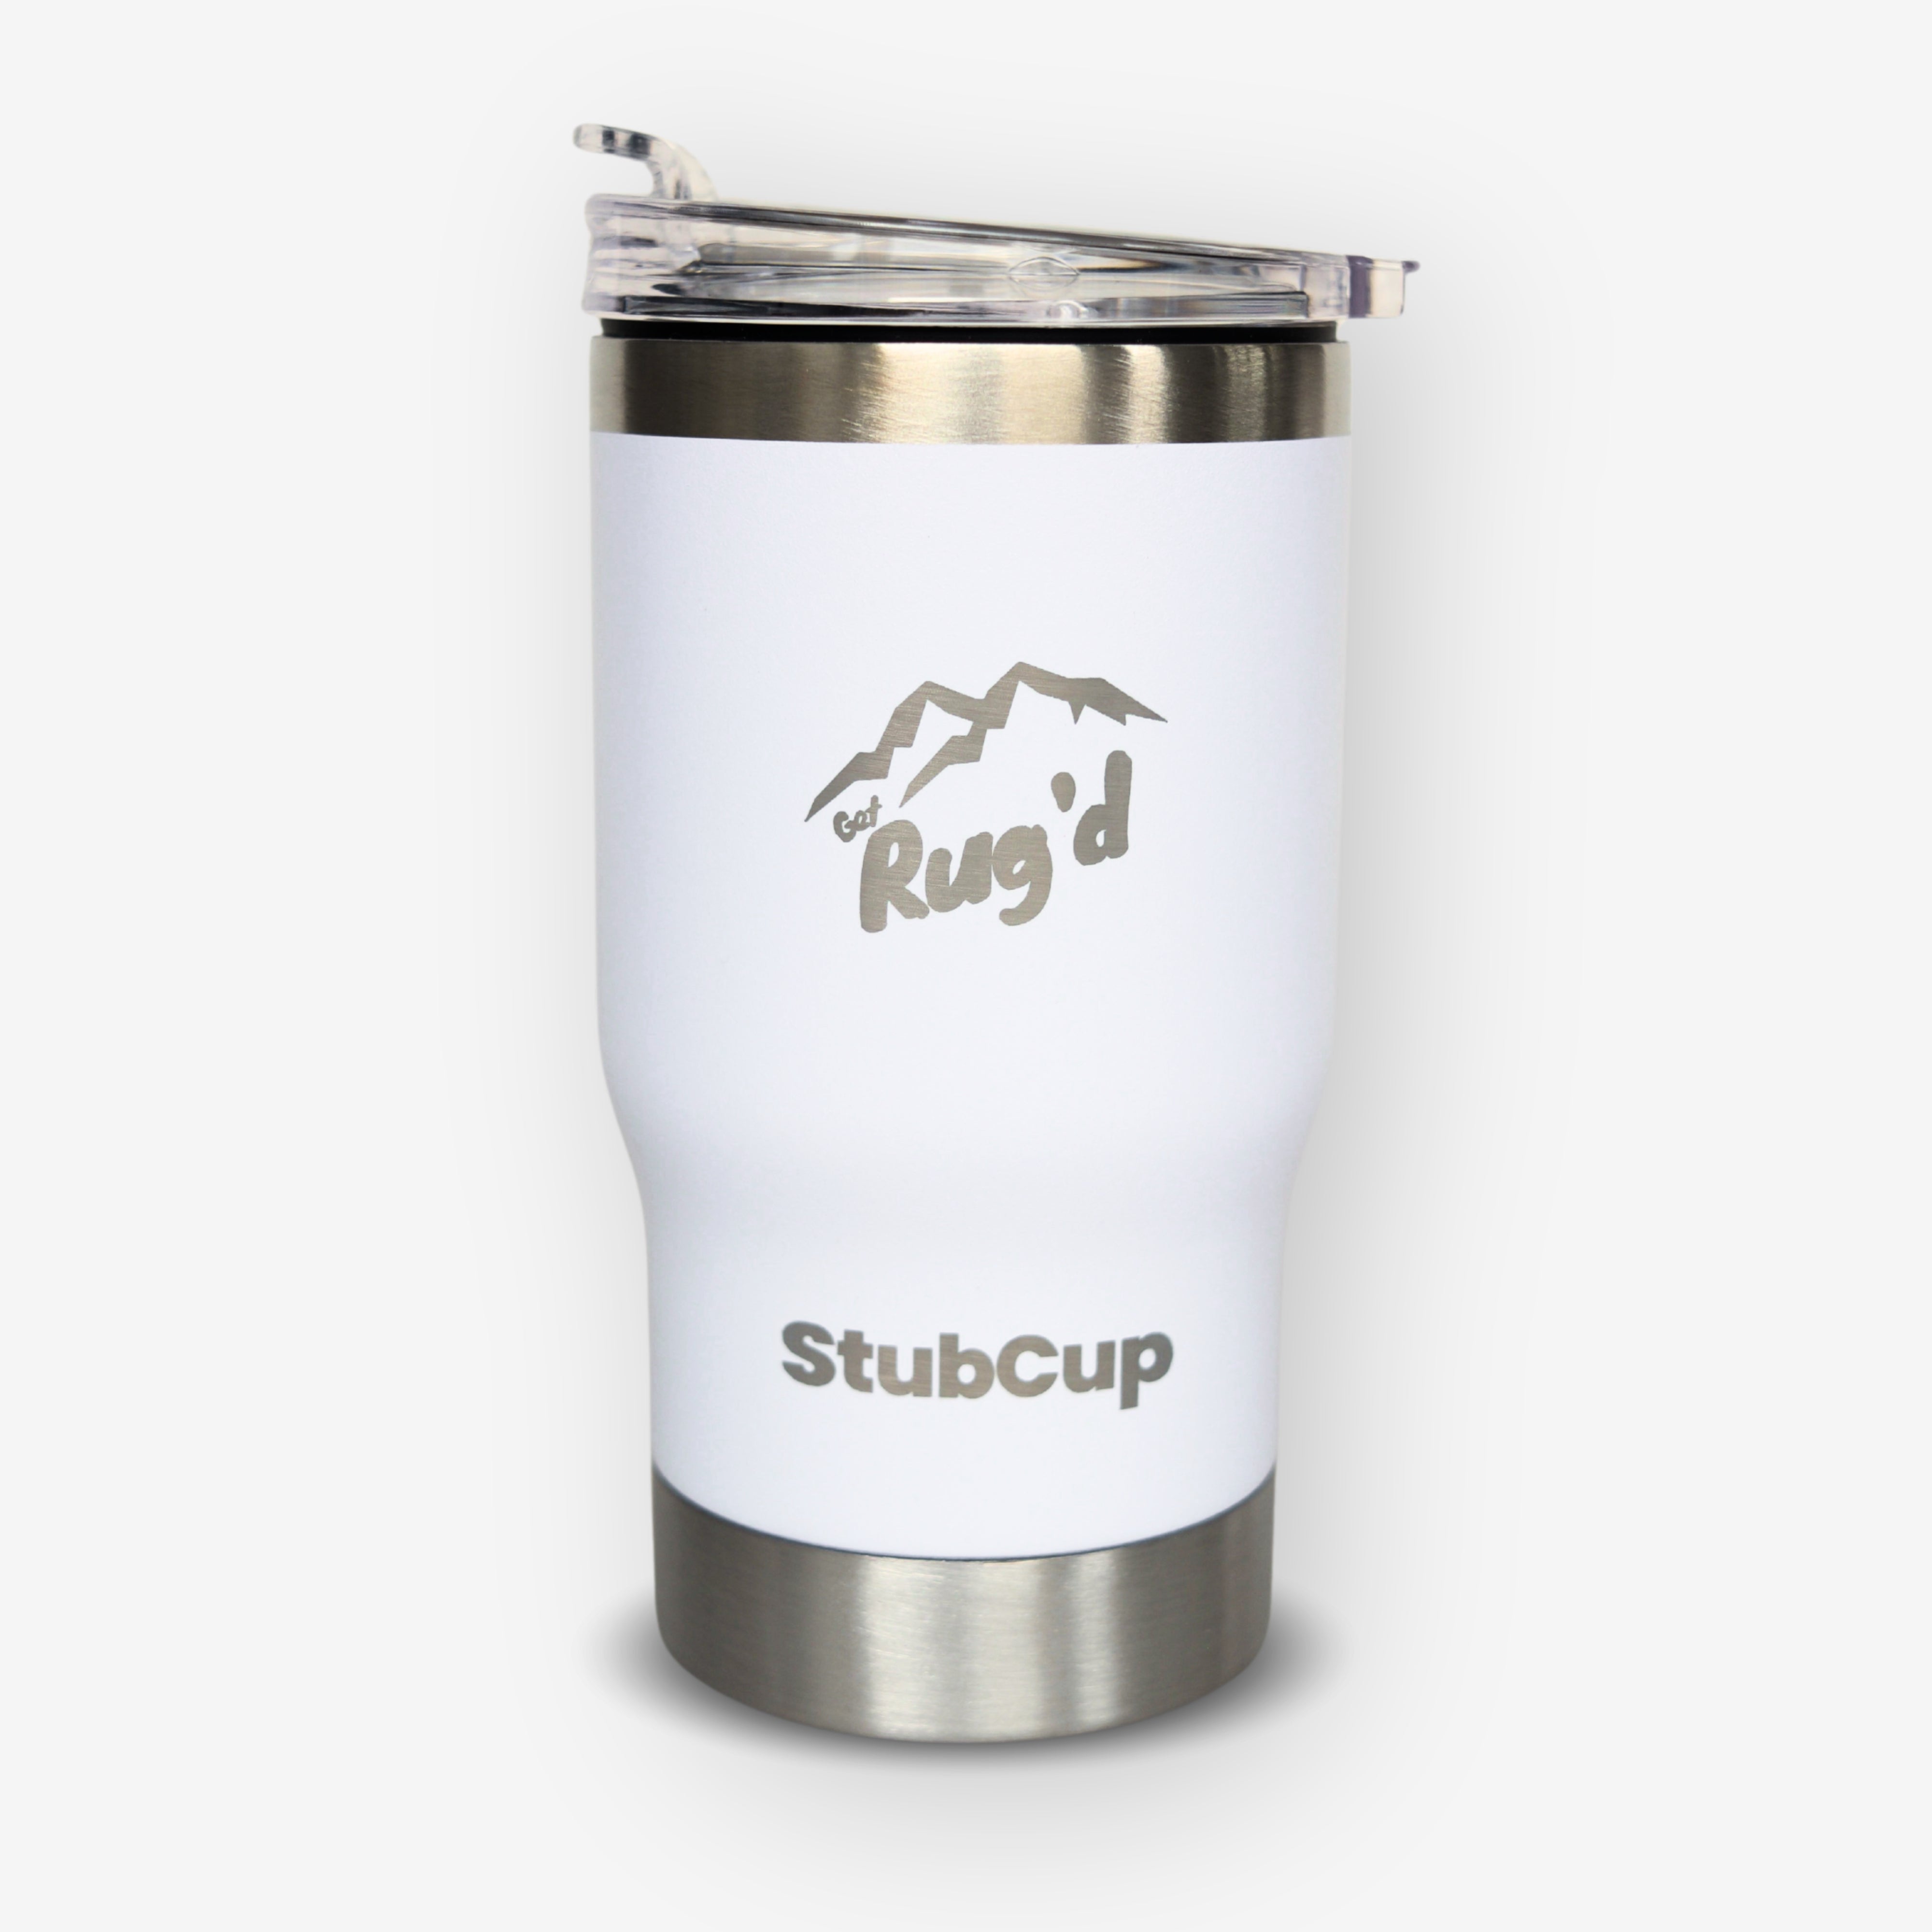 White Stainless Steel Coffee Cup with lid